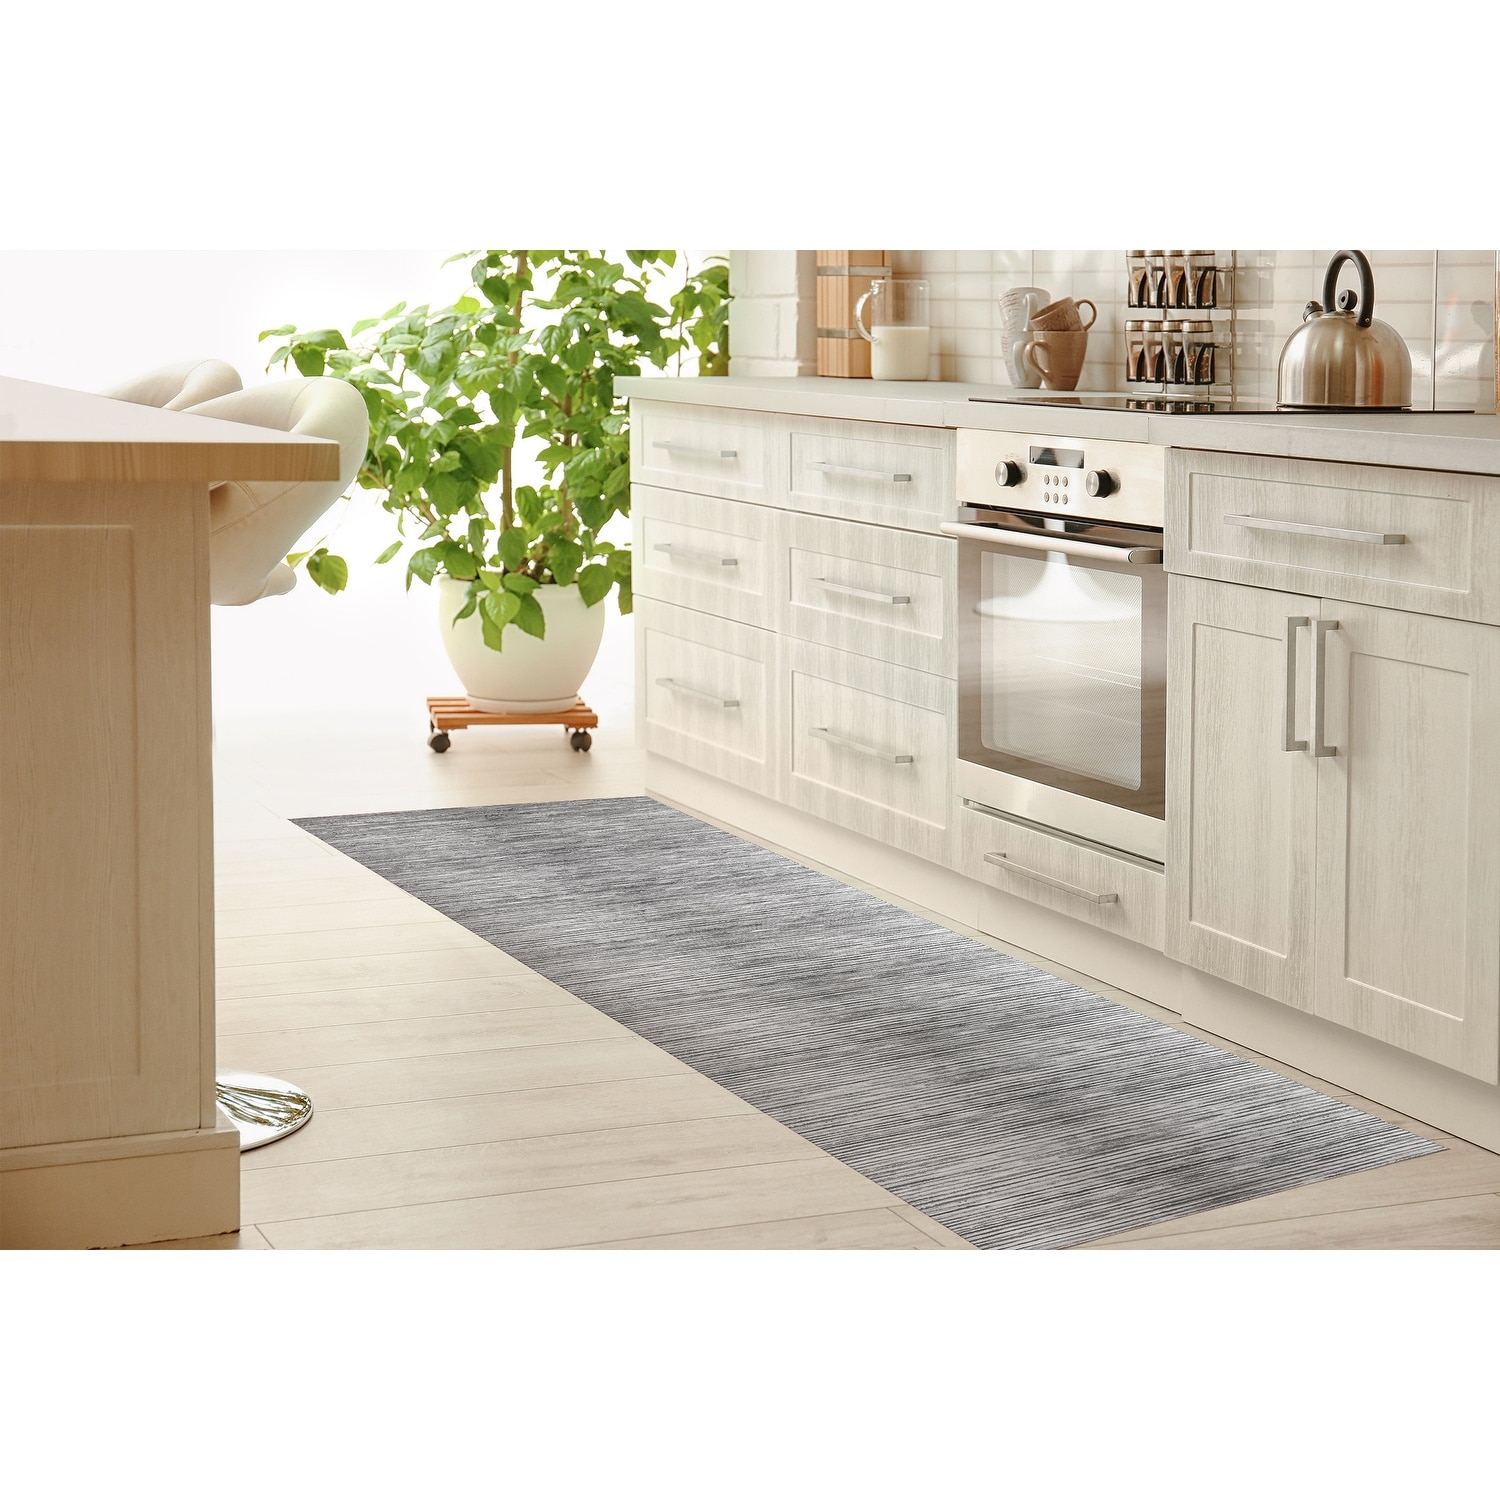 https://ak1.ostkcdn.com/images/products/is/images/direct/9abedc8cb5f63858382f5bf345d5b9b65f5be06c/WABI-SABI-STRIPE-GREY-Kitchen-Mat-By-Becky-Bailey.jpg